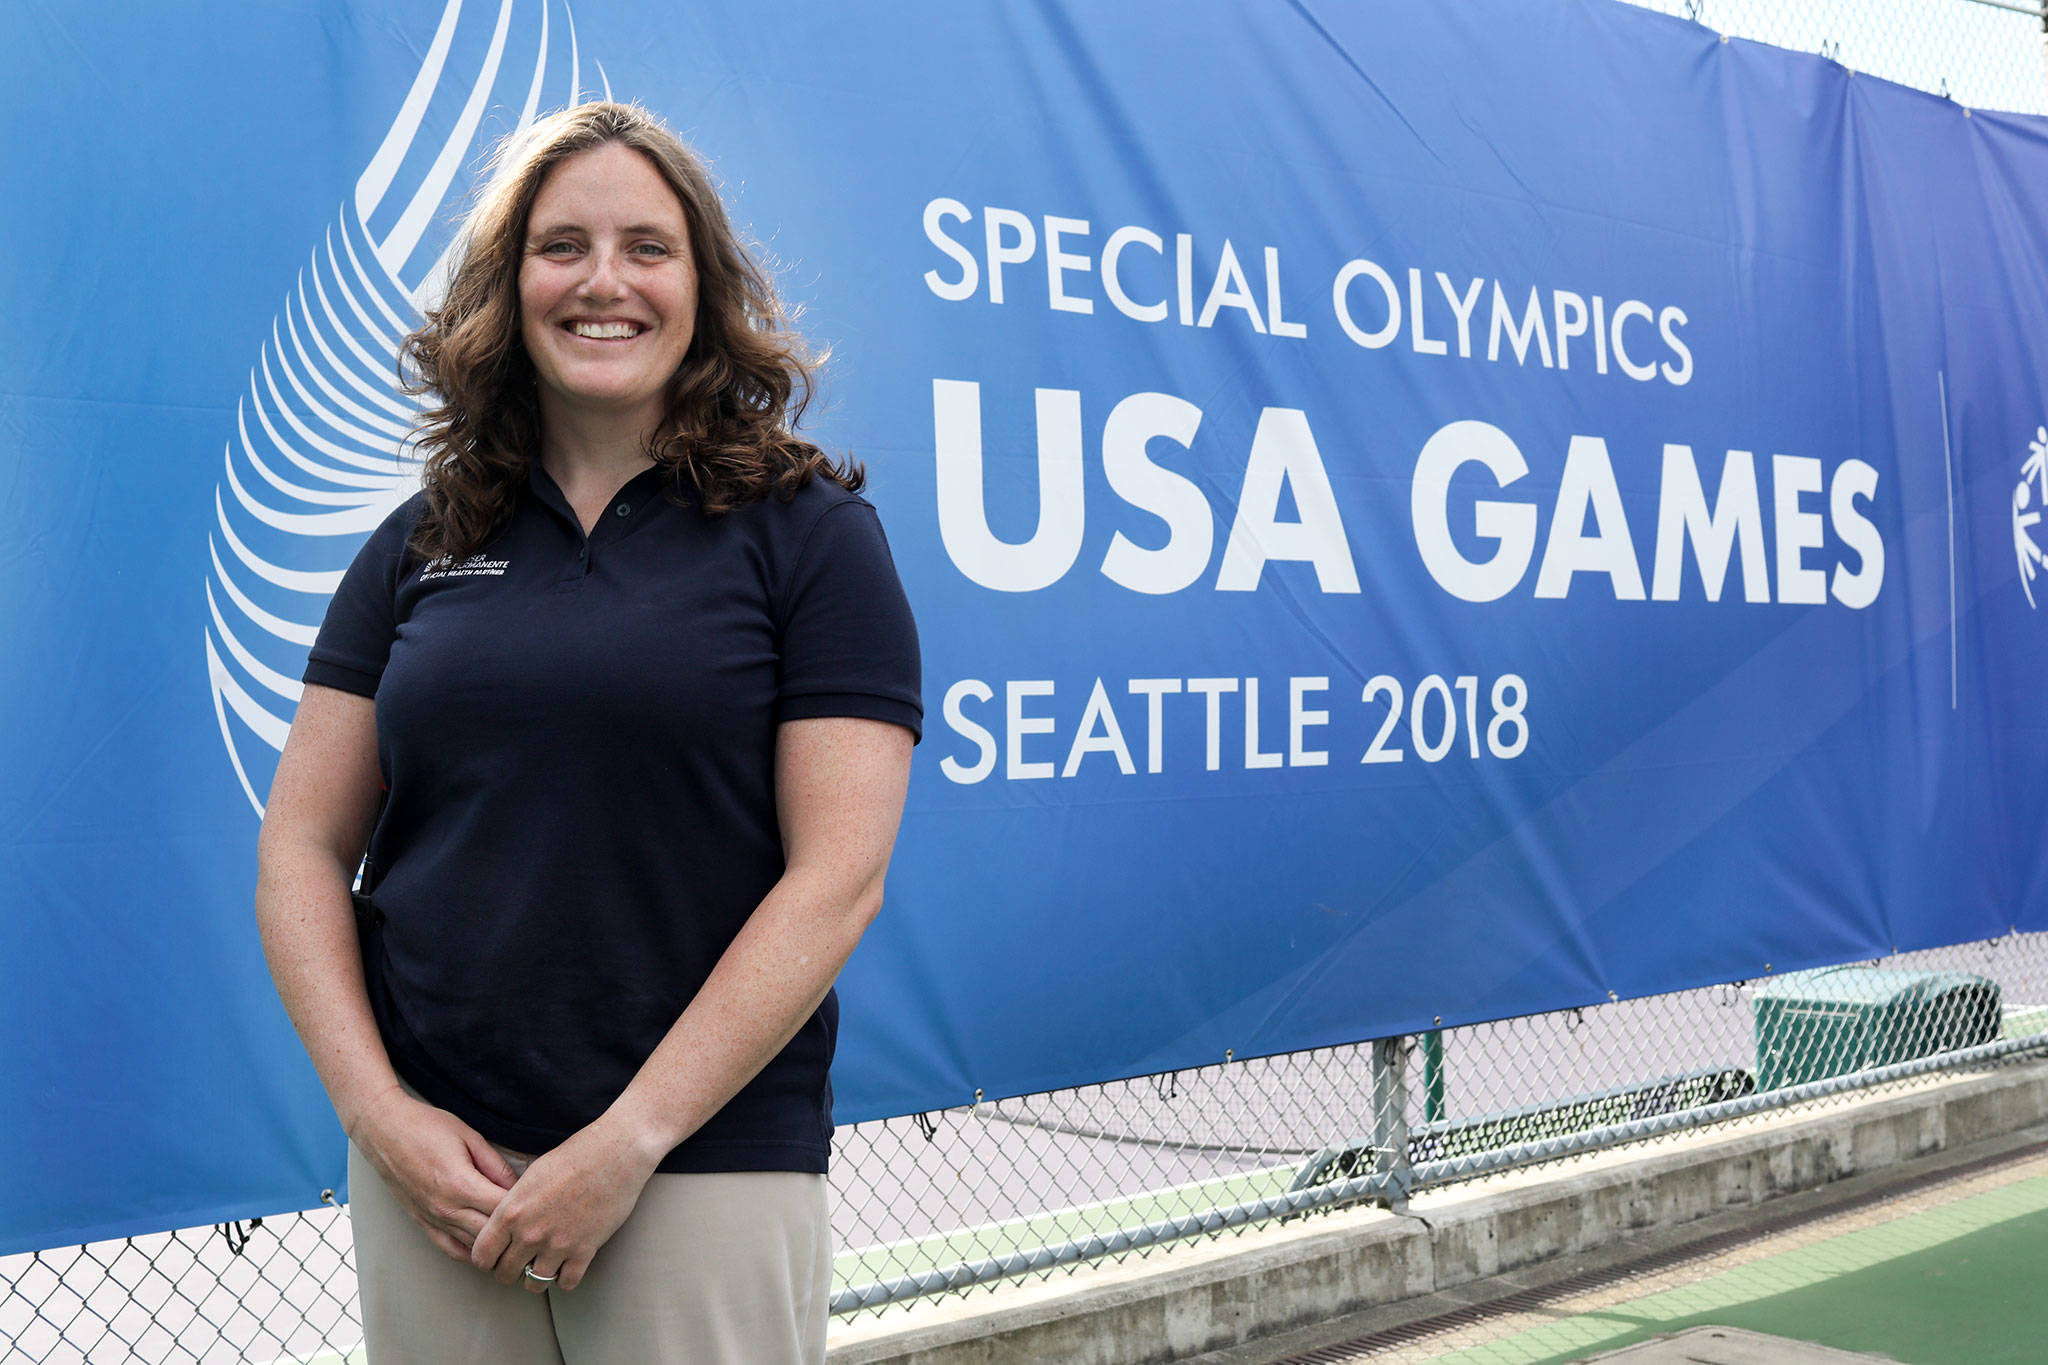 Jessie Fudge, an Everett sports medicine doctor, was the chief medical officer for the Special Olympics USA Games. She’s been volunteering her time for the past year, coordinating other physicians and nurses for the events. (Lizz Giordano / The Herald)